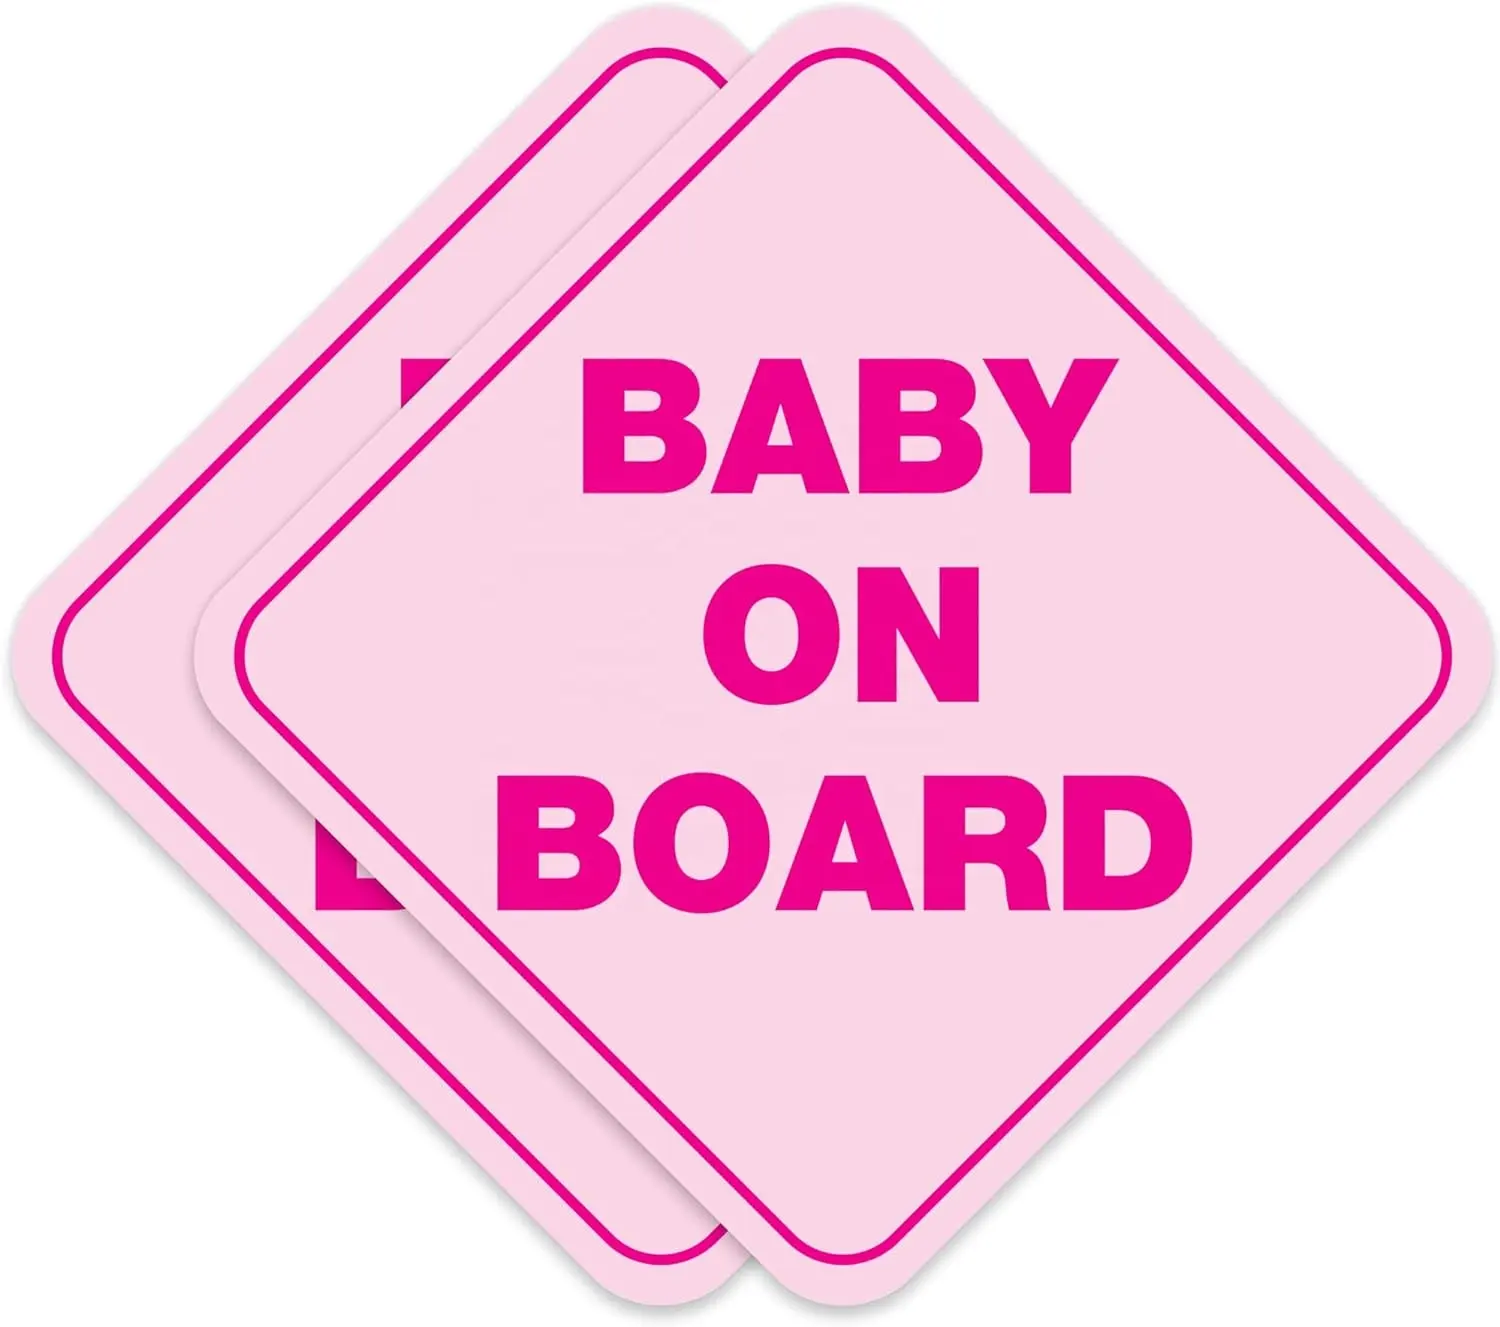 Baby in Car Stickers for Girls Removable, Non-Magnetic Baby Safety Stickers for Cars & Windows - Baby Pink (2 Vinyl Decals)